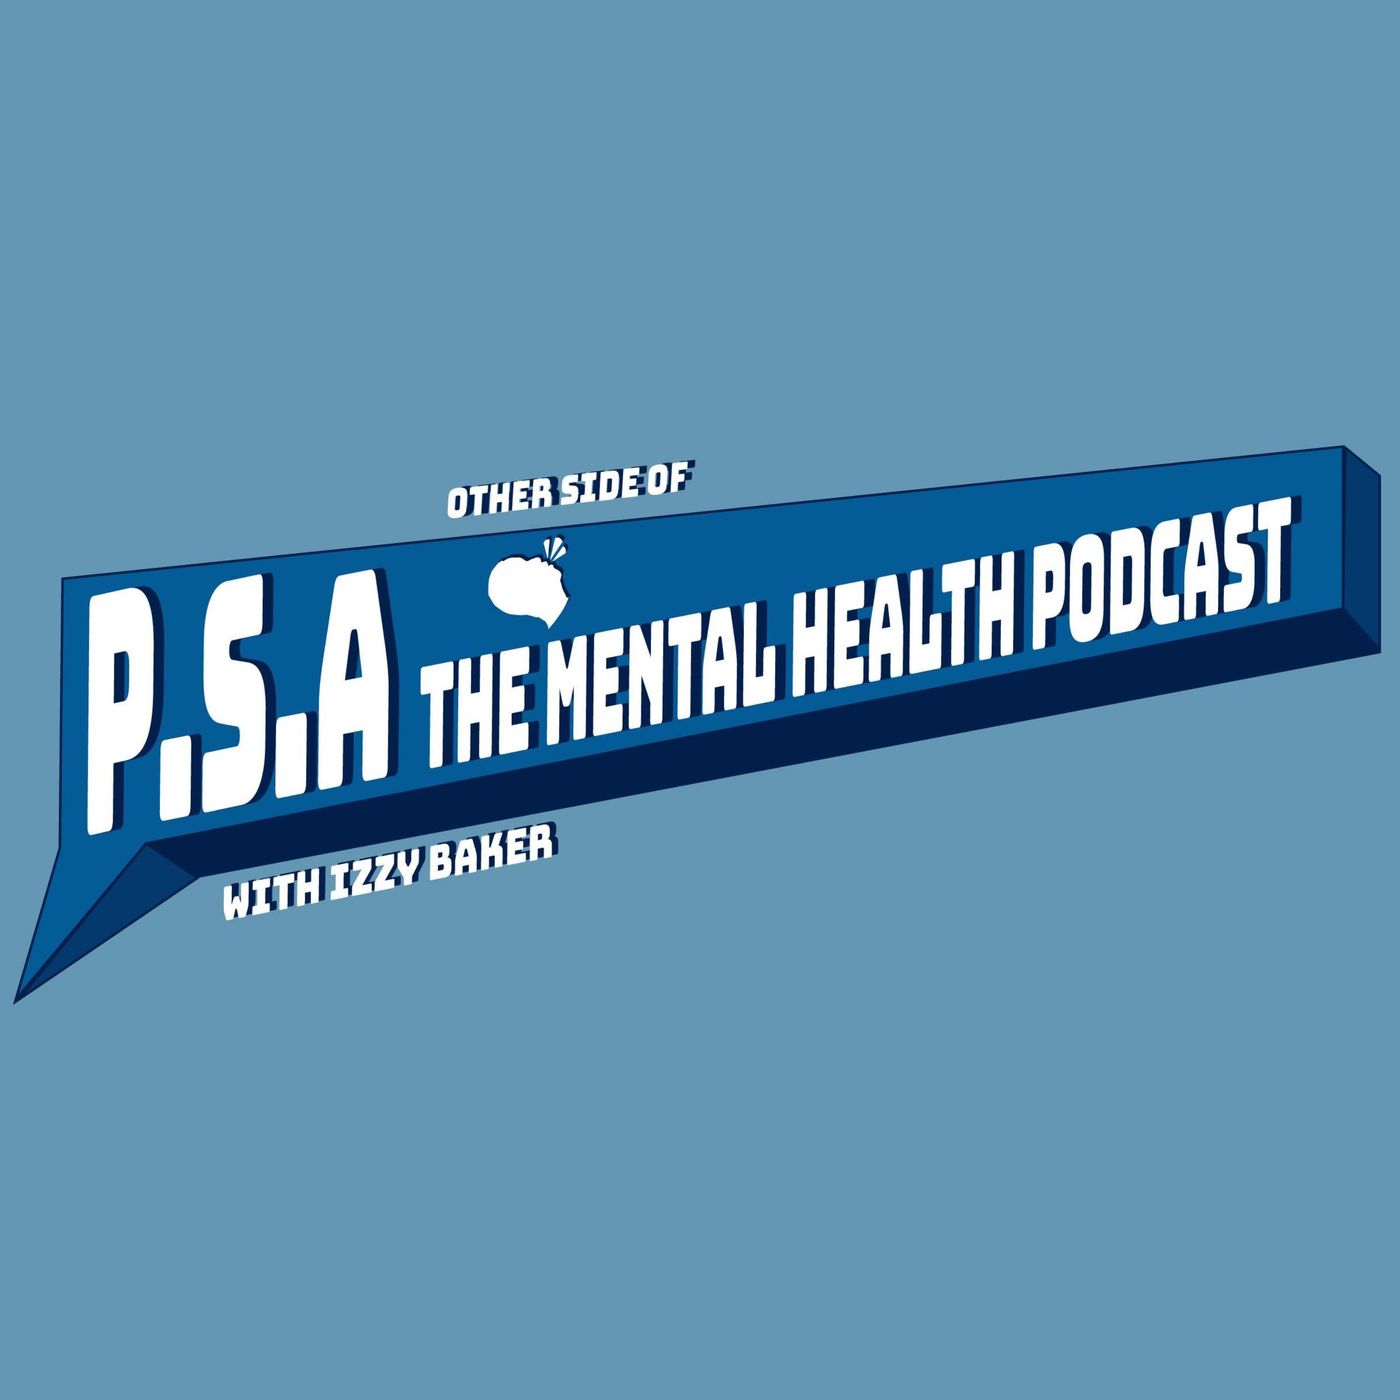 P.S.A the Mental Health Podcast